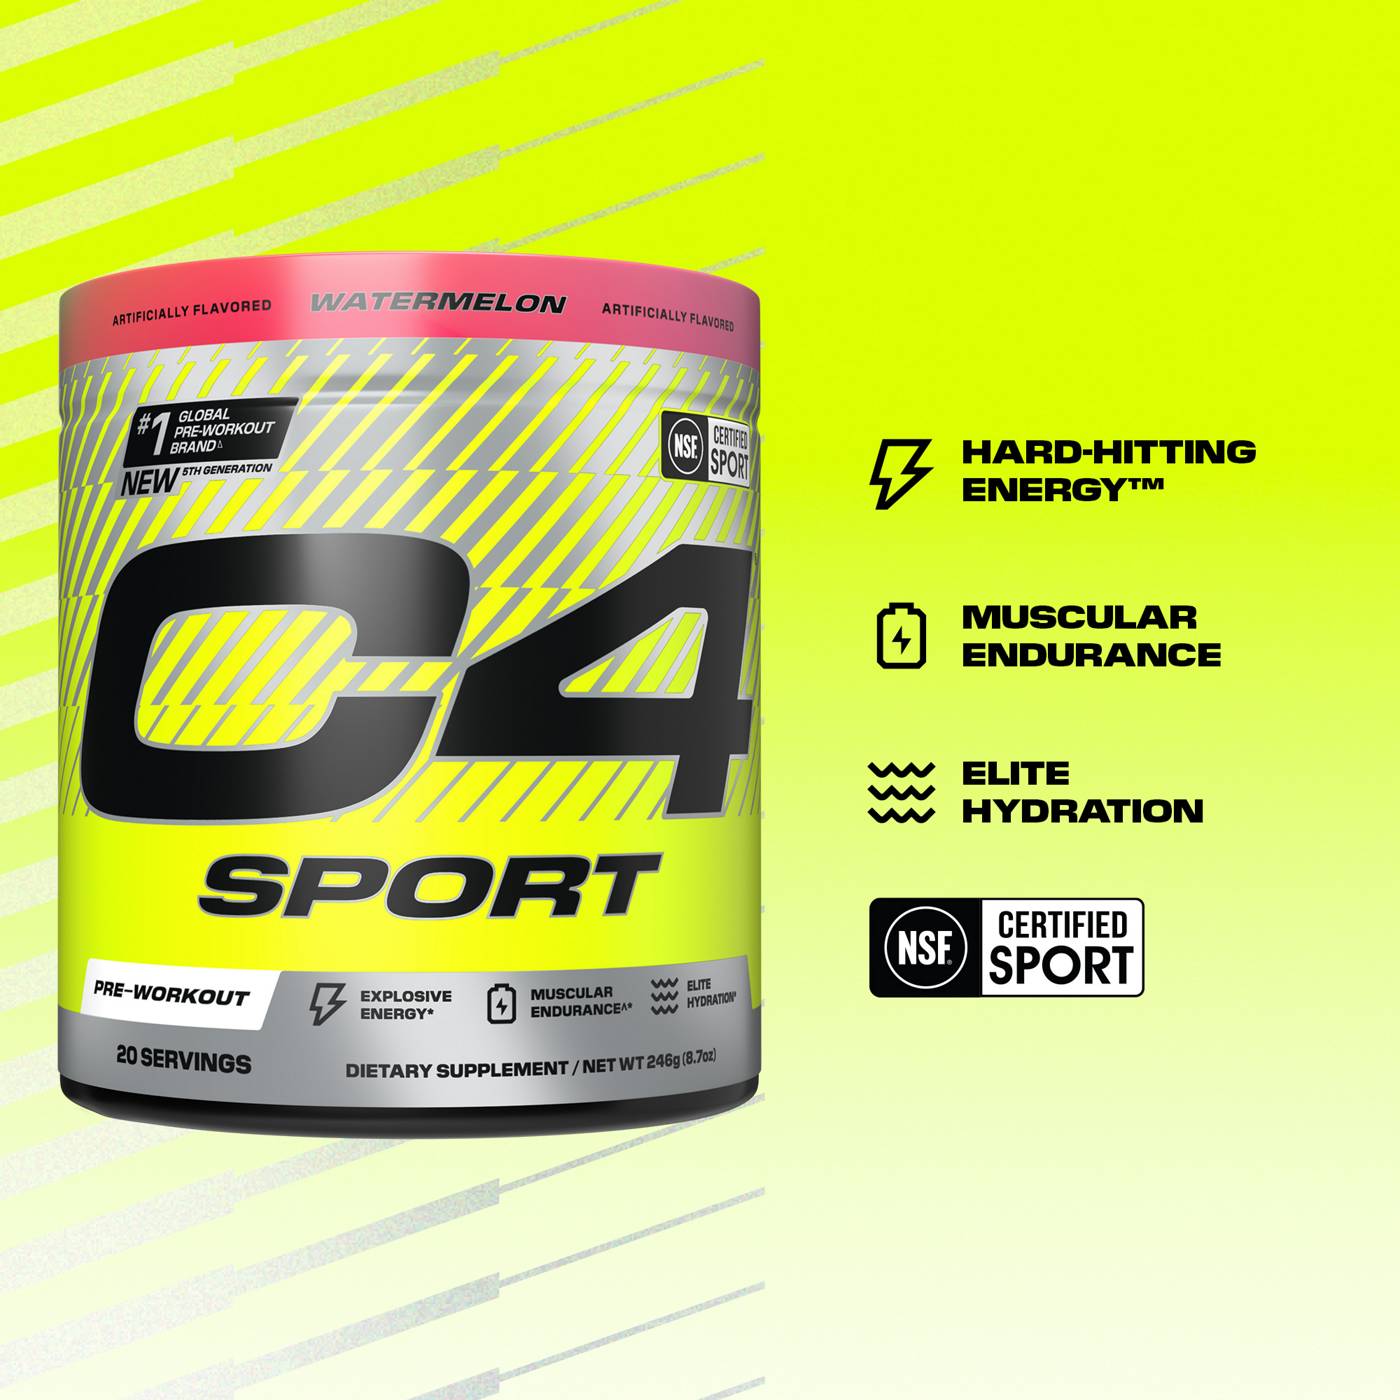 Cellucor C4 Sport Pre-Workout - Watermelon ; image 4 of 8